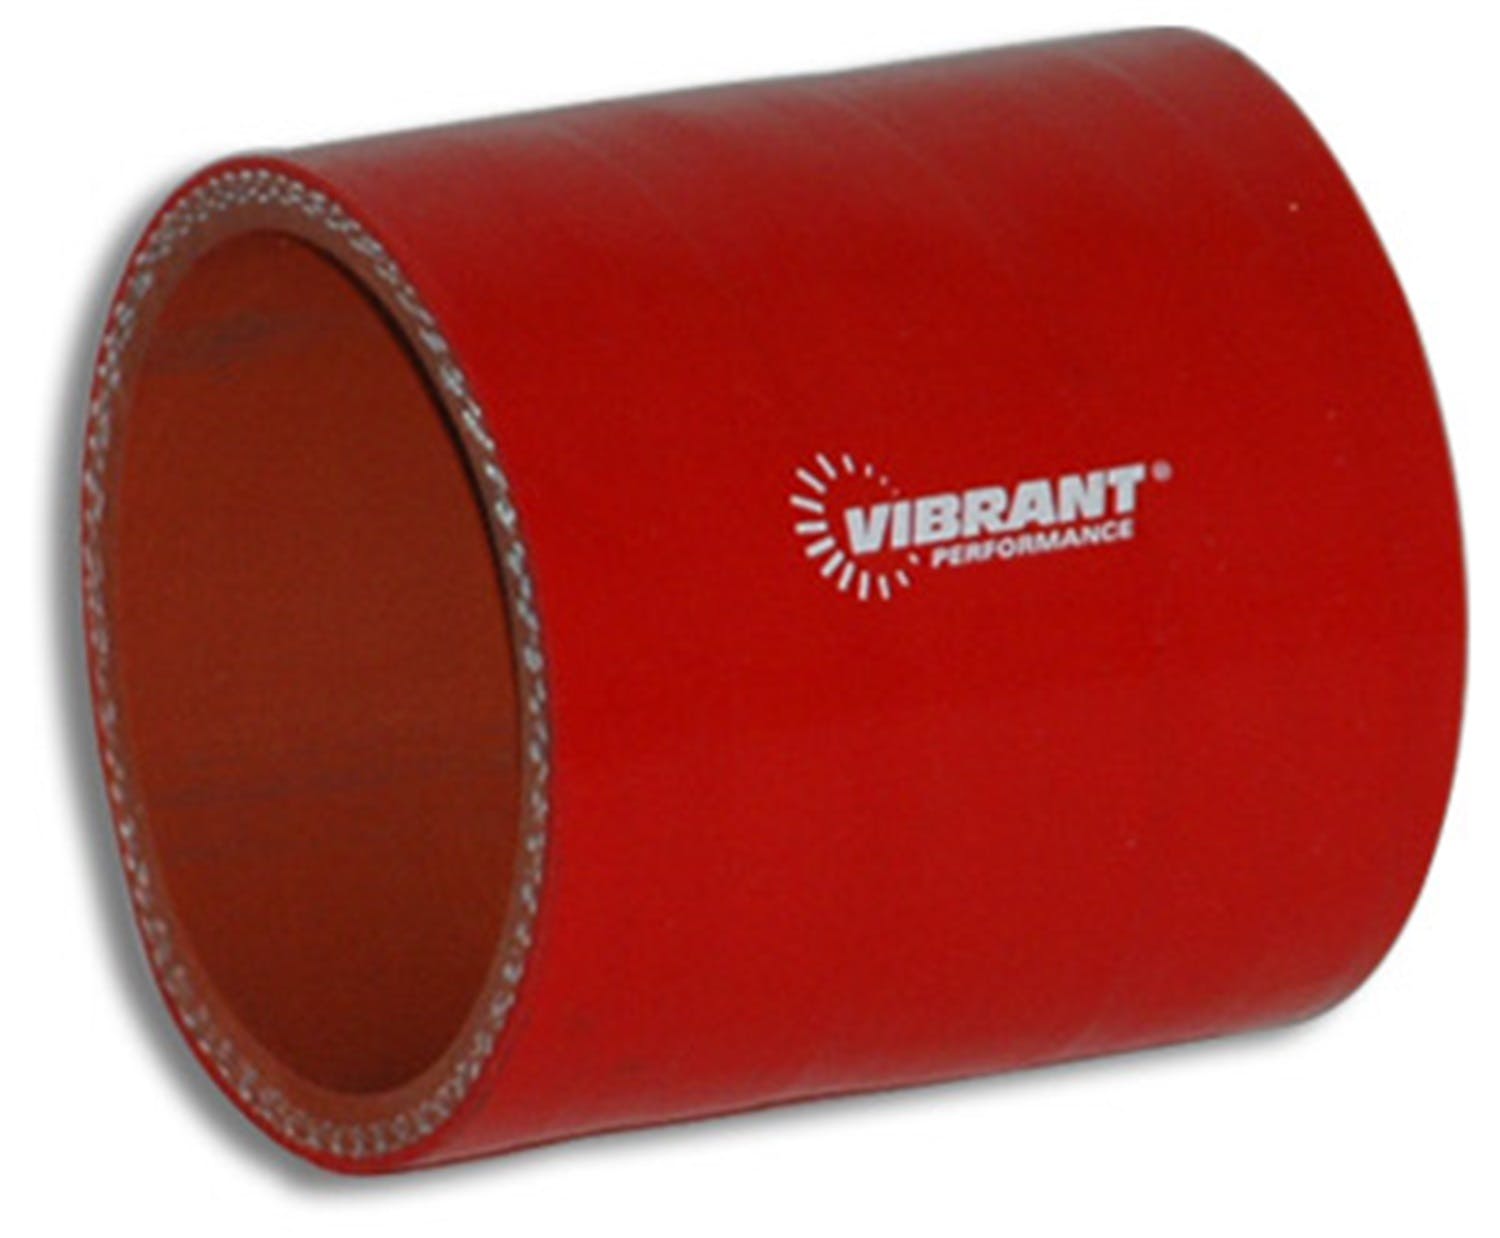 Vibrant Performance 2700R 4 Ply Silicone Sleeve, 1 inch I.D. x 3 inch Long - Red